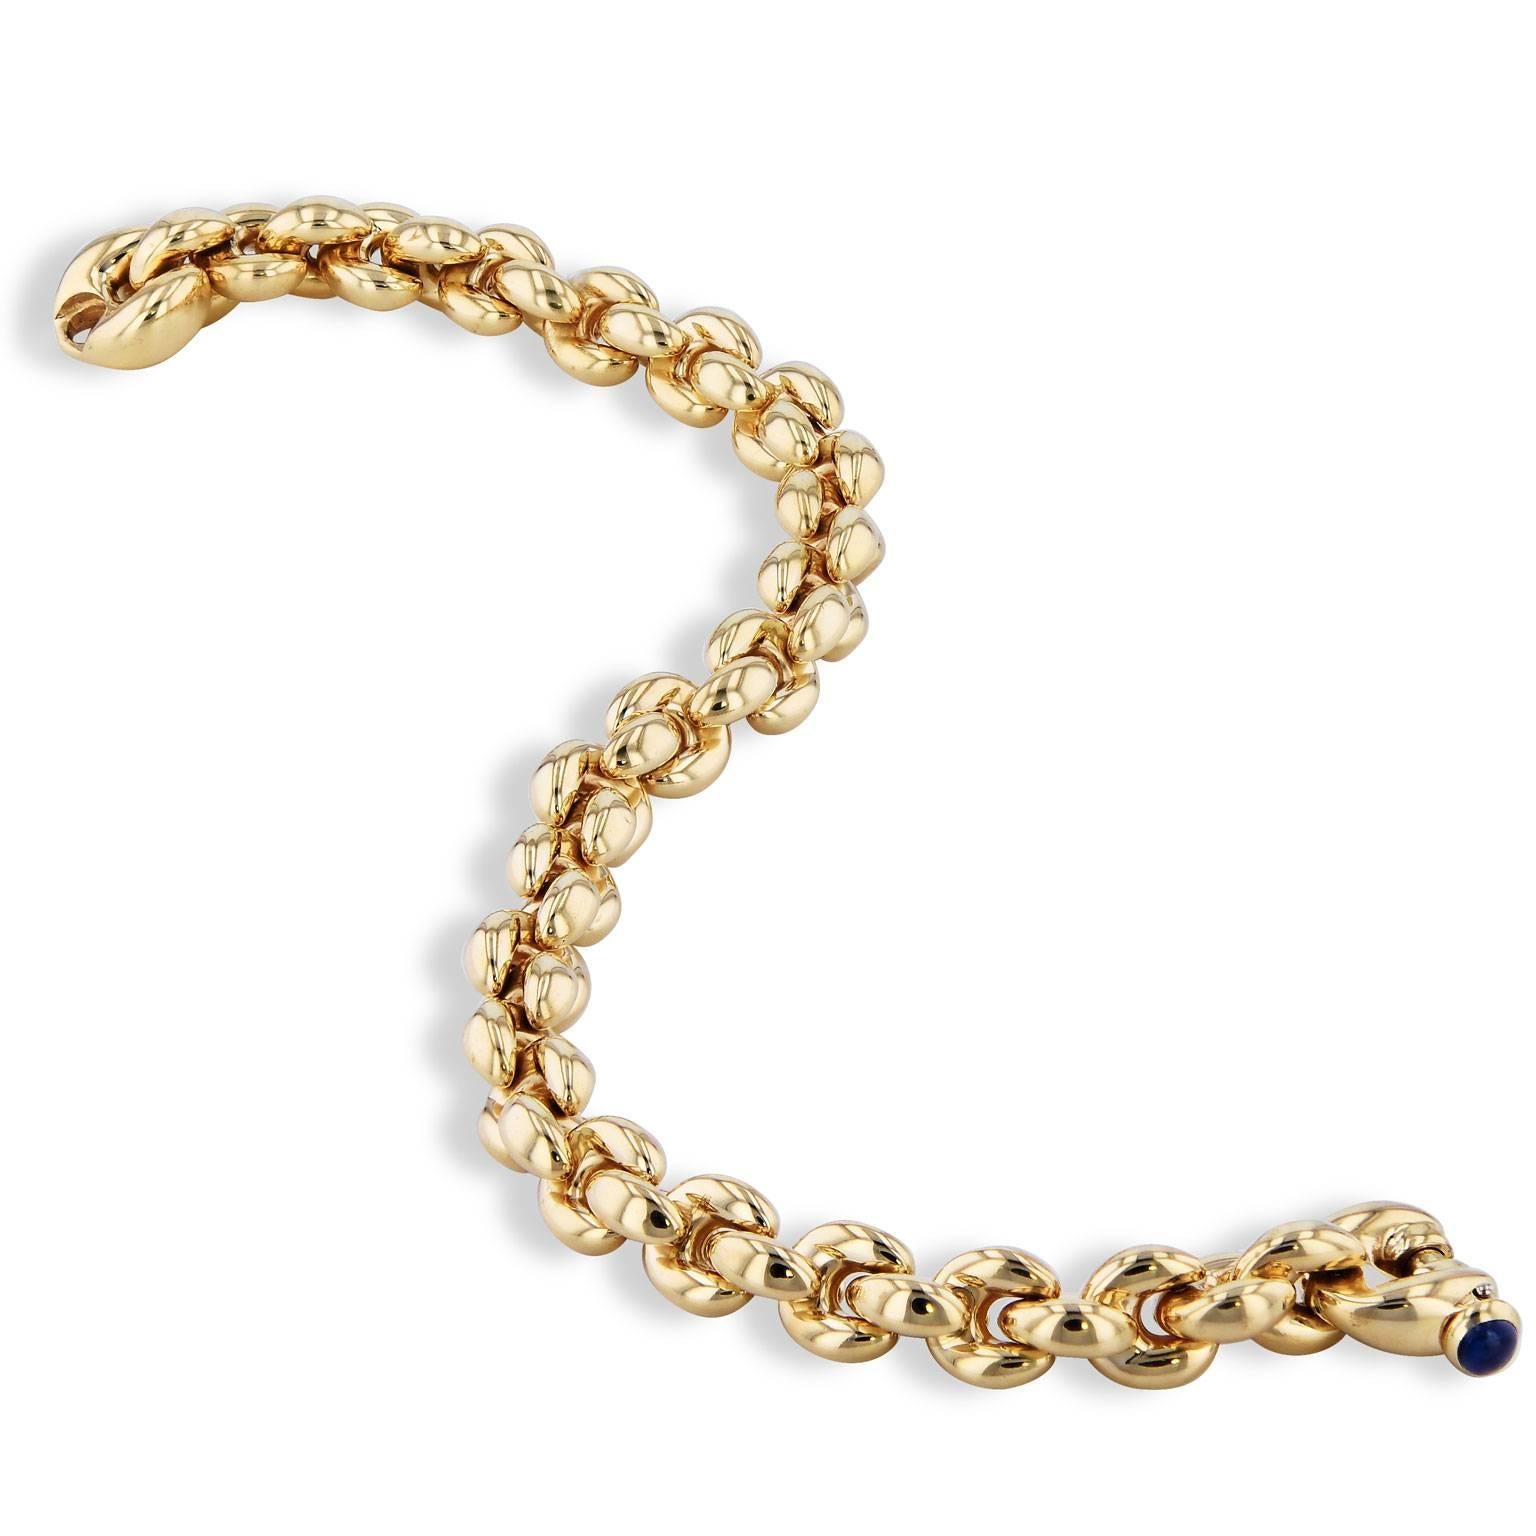 Enjoy this previously loved 18 karat yellow gold link bracelet with a sapphire cabochon clasp. Make it your new favorite accessory.